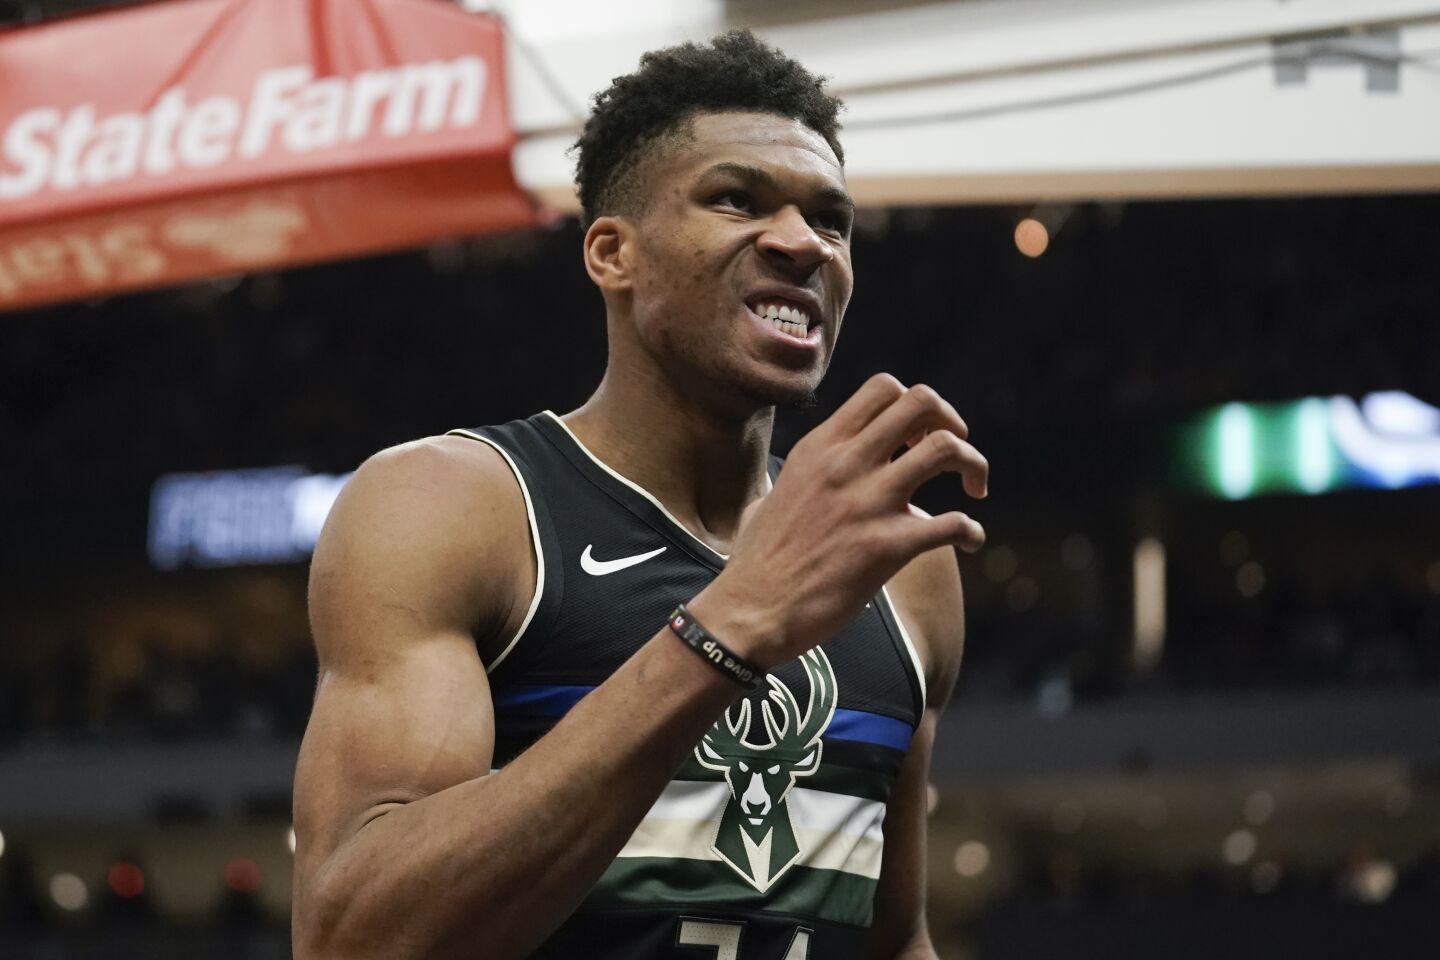 Giannis Antetokounmpo reacts after making a basket and getting fouled during the second half of a game against the Lakers on Dec. 19.